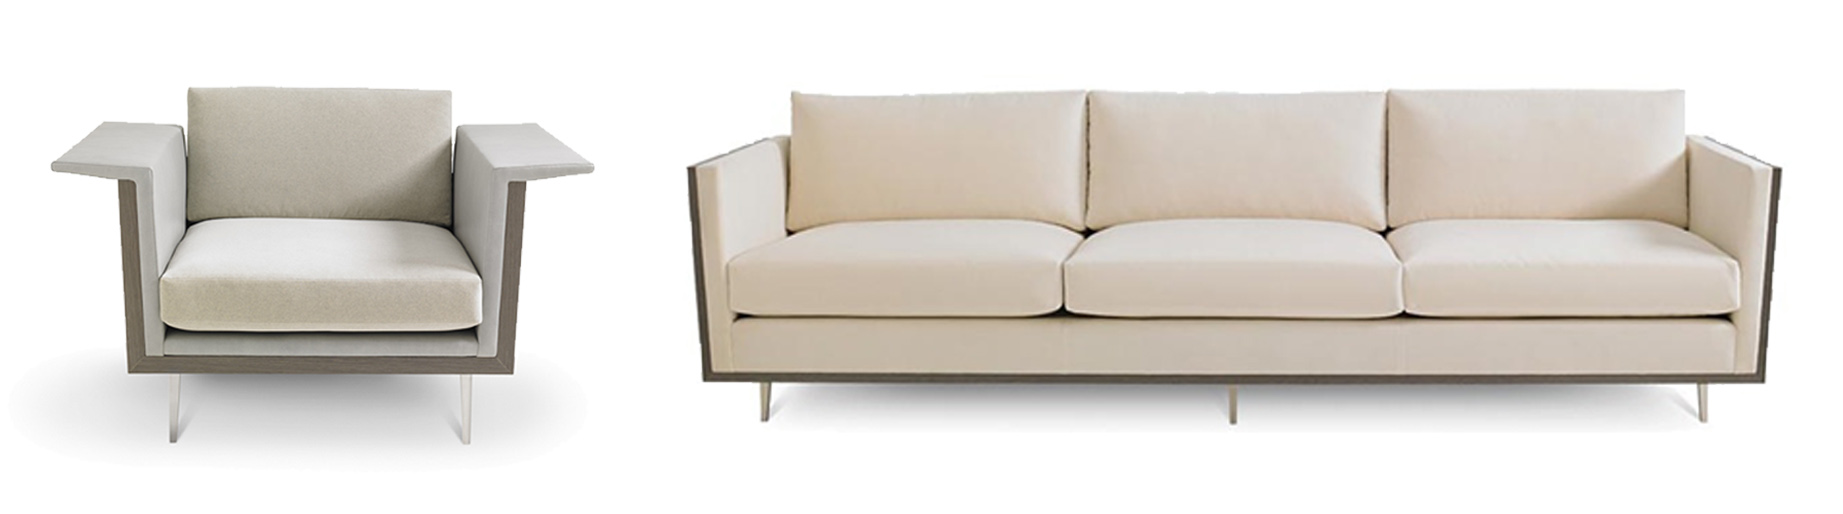 rottet by lauren rottet for decca home structured chair and sofa